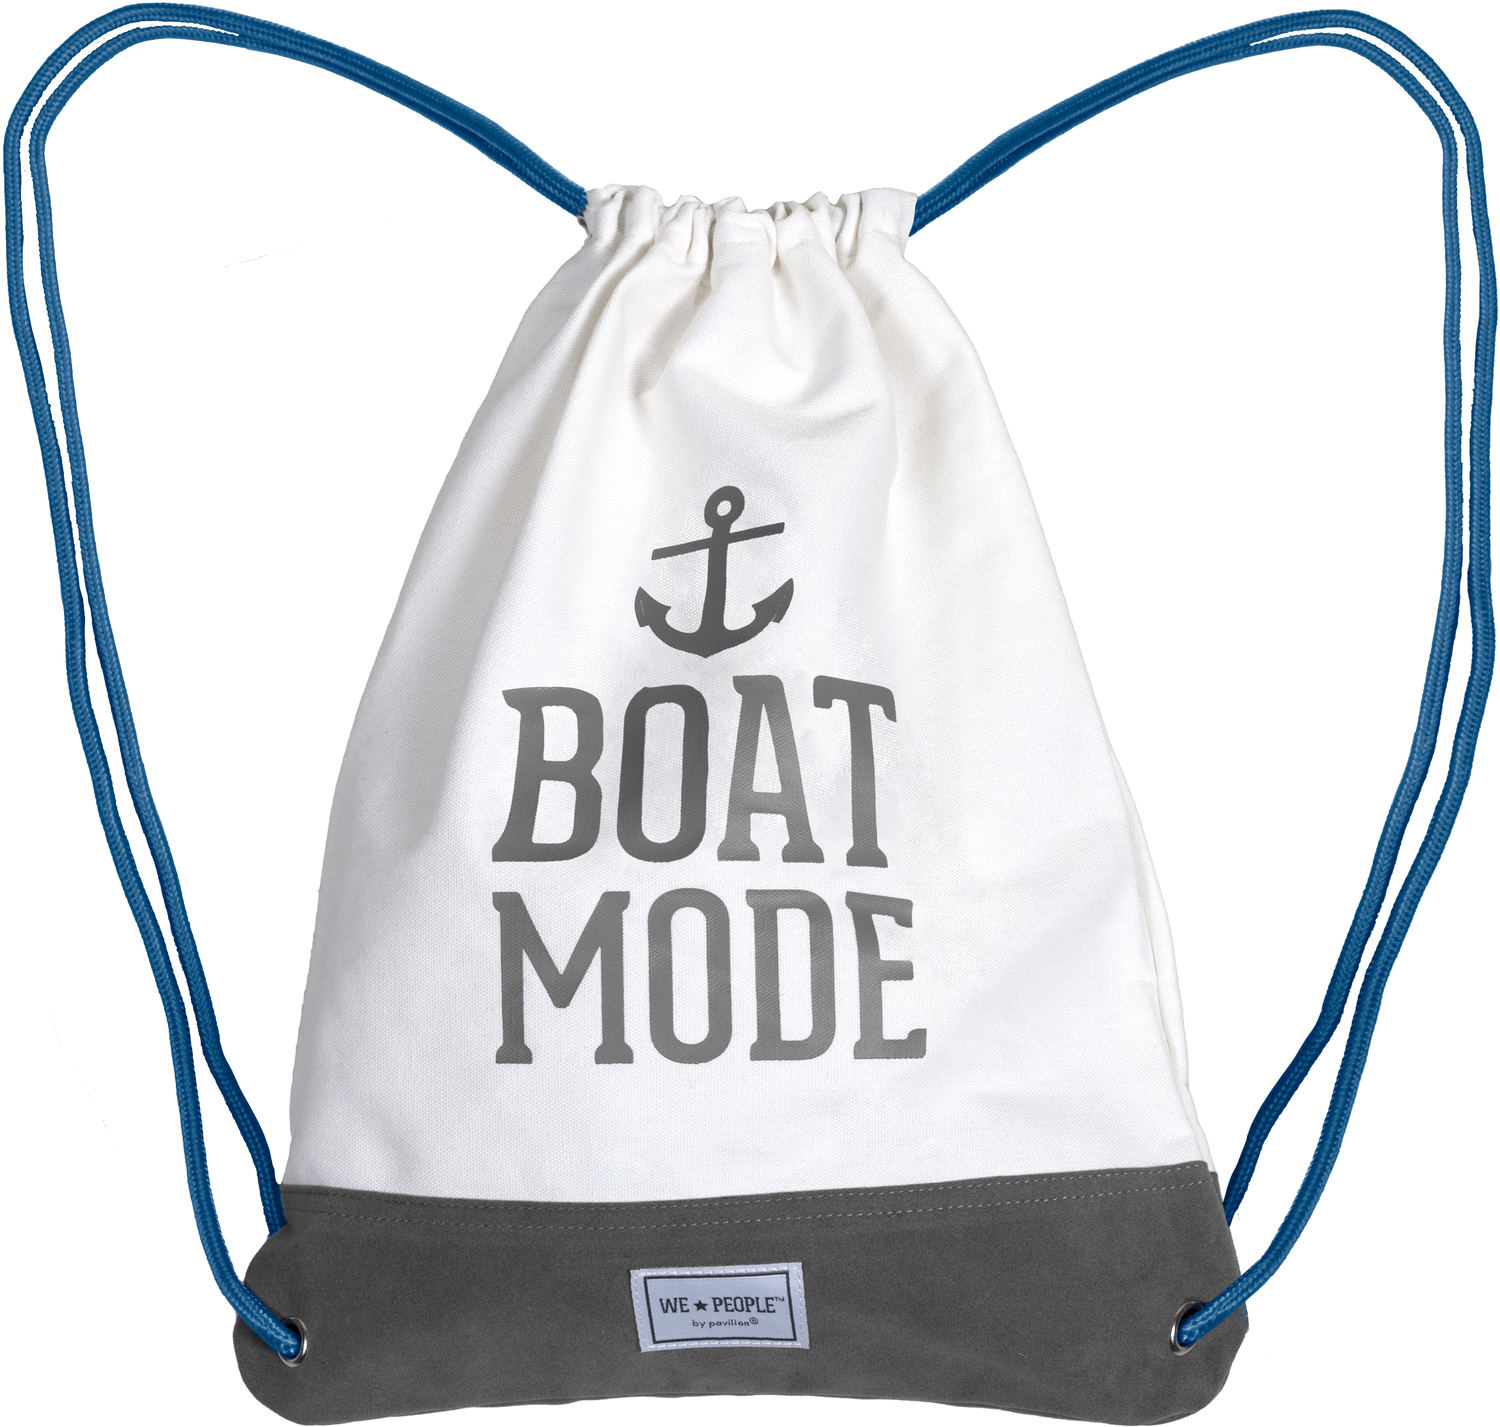 Boat Mode by We People - Boat Mode - 13" x 17" Canvas Drawstring Bag